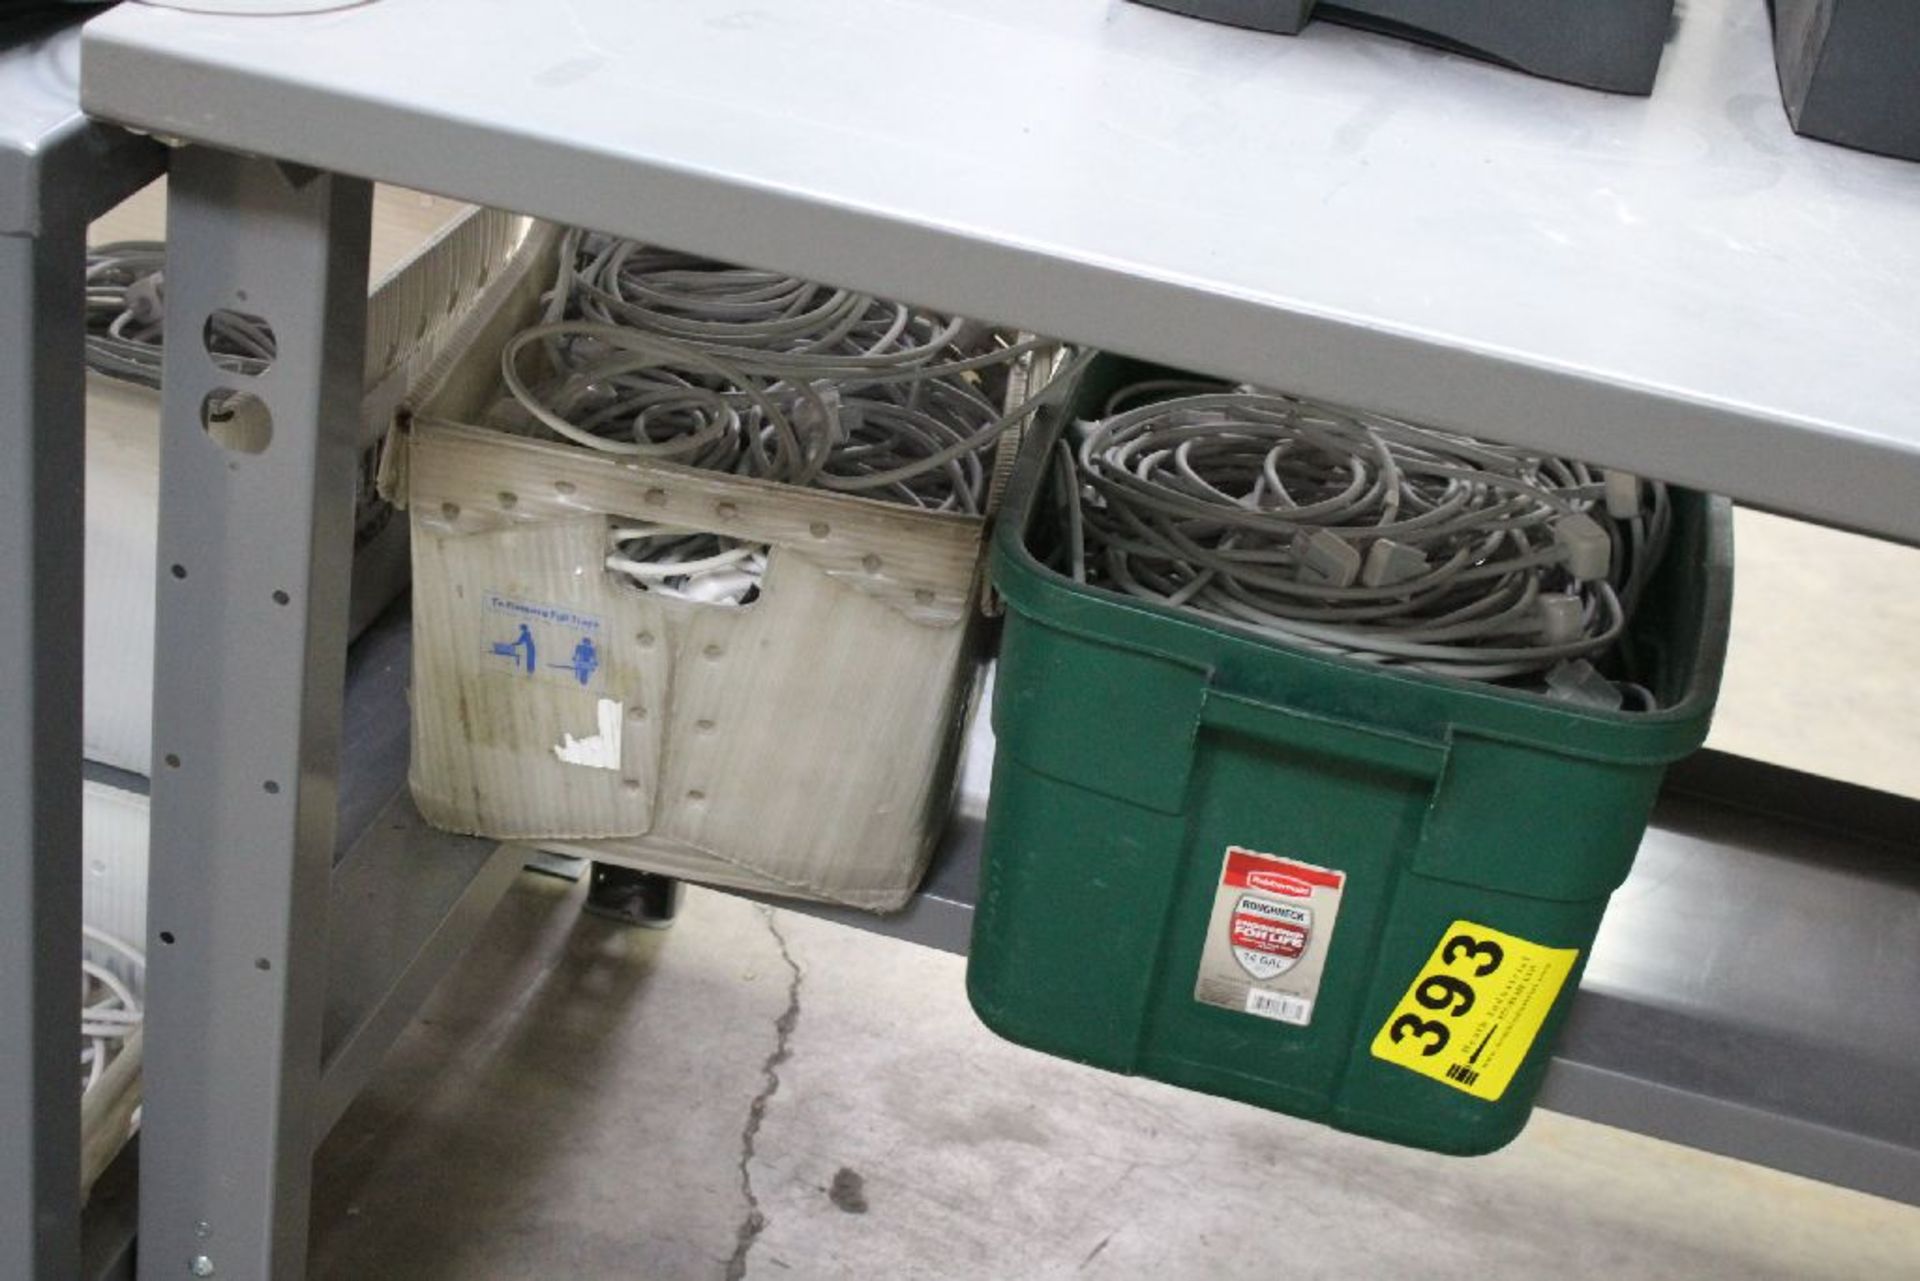 ASSORTED APPLE POWER CORDS IN TWO BOXES